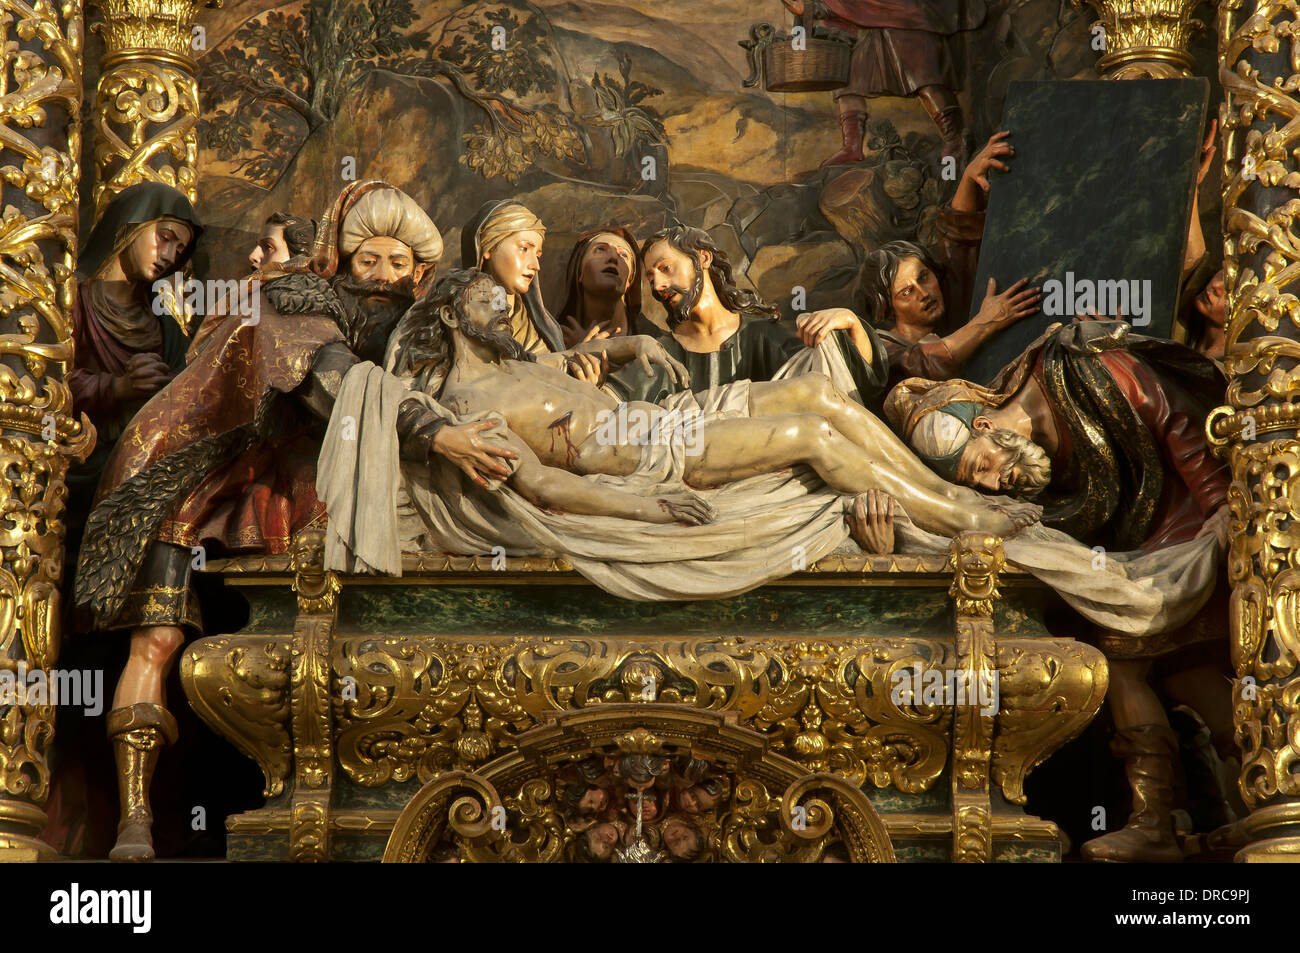 Hospital de la Caridad, Altar, The Burial of Christ by Pedro Roldan, Seville, Region of Andalusia, Spain, Europe Stock Photo